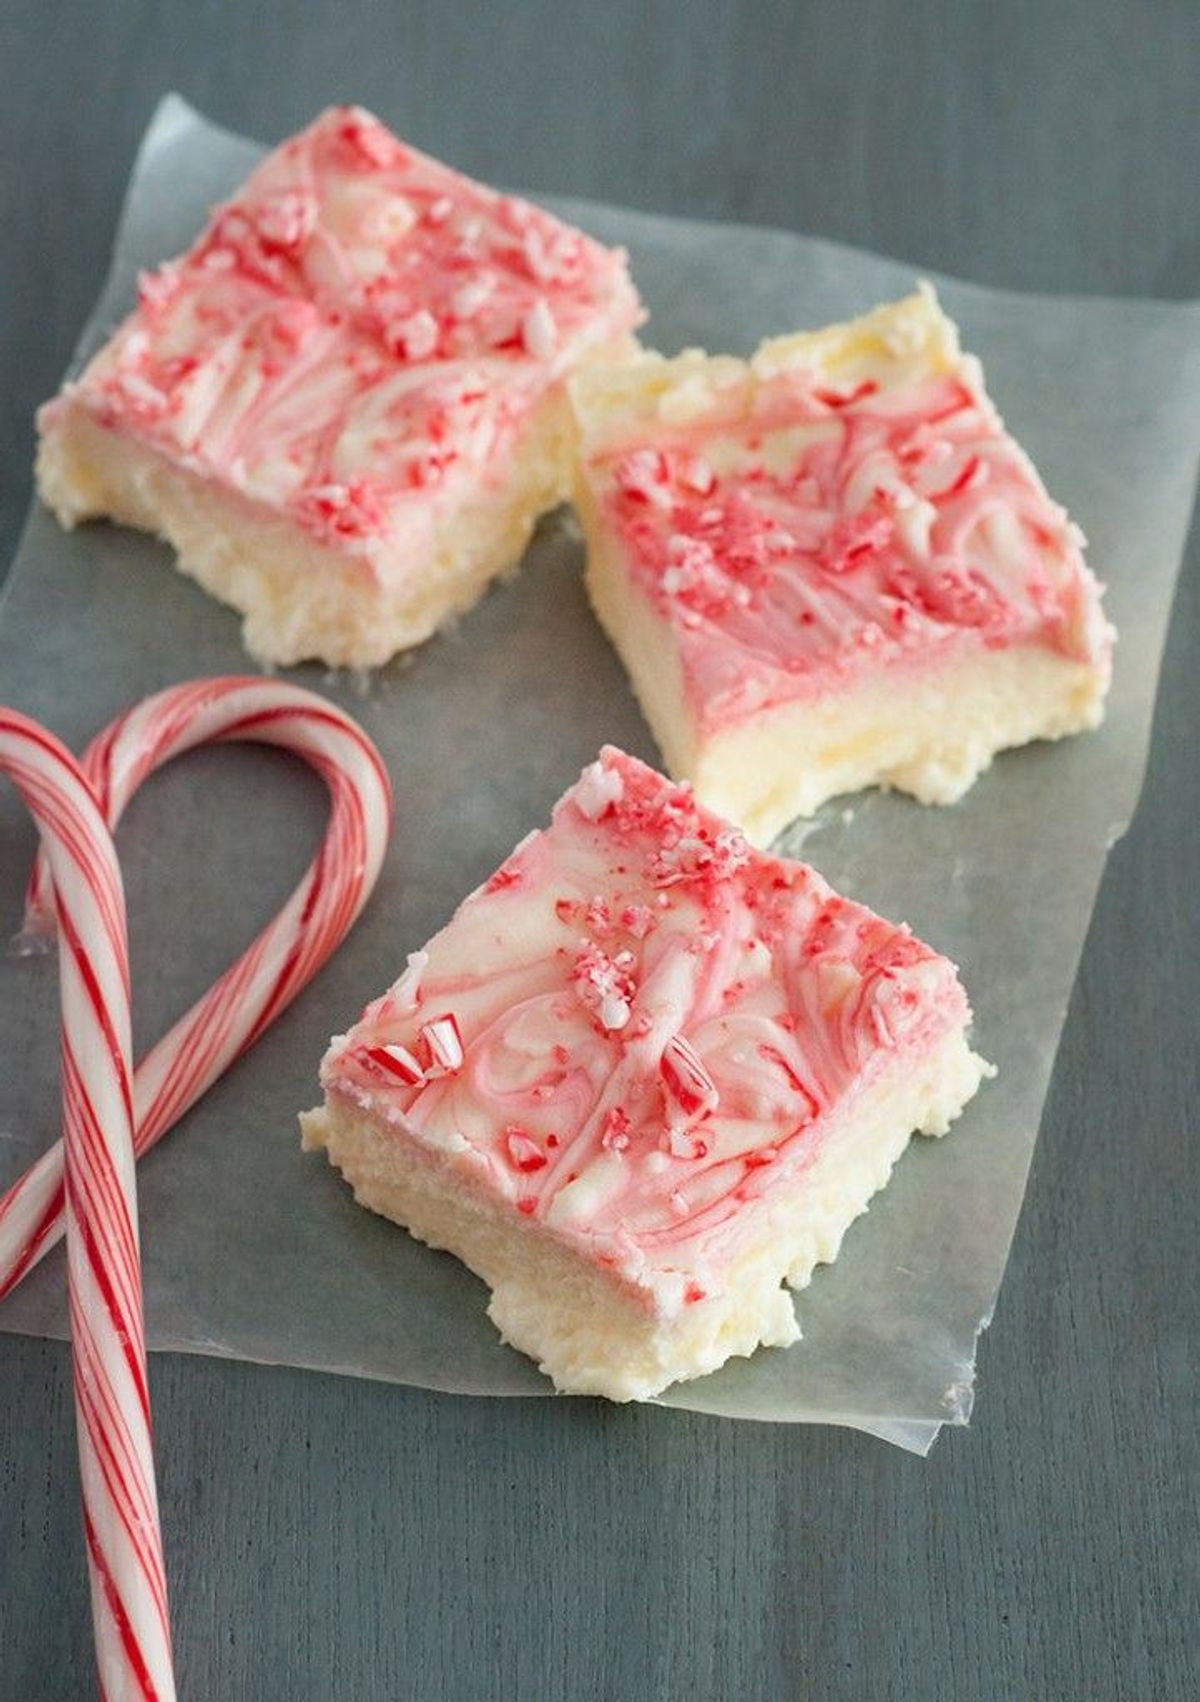 10 Festive Desserts to Try This Holiday Season